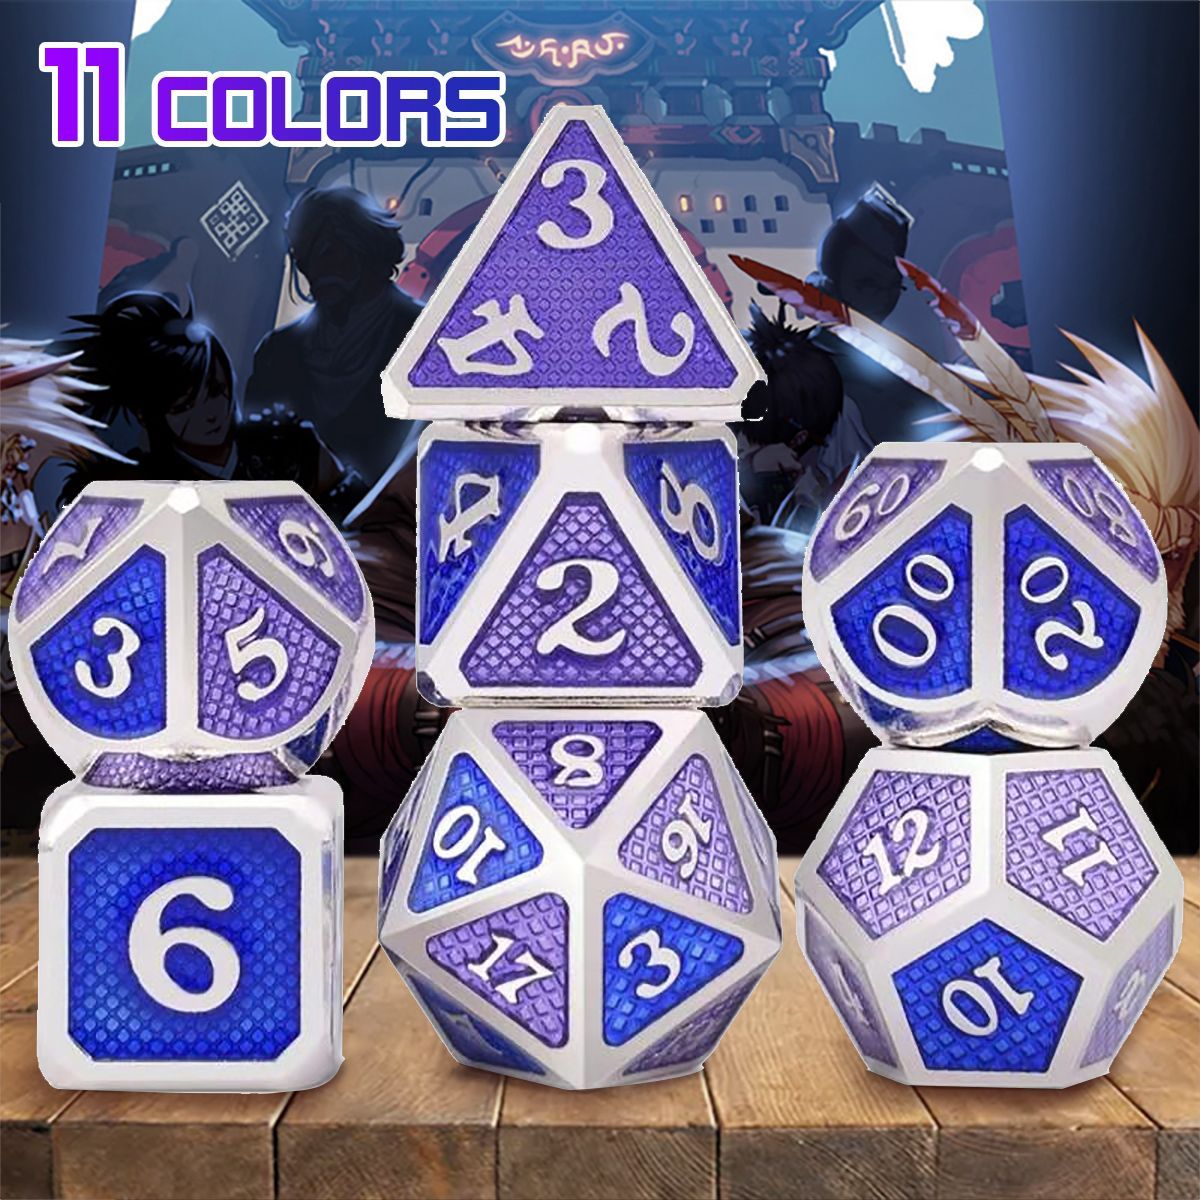 7-PcsSet-Alloy-Metal-Dice-Set-Playing-Game-Poker-Card-Dungeons-Dragons-Party-Board-Game-Toy-1568223